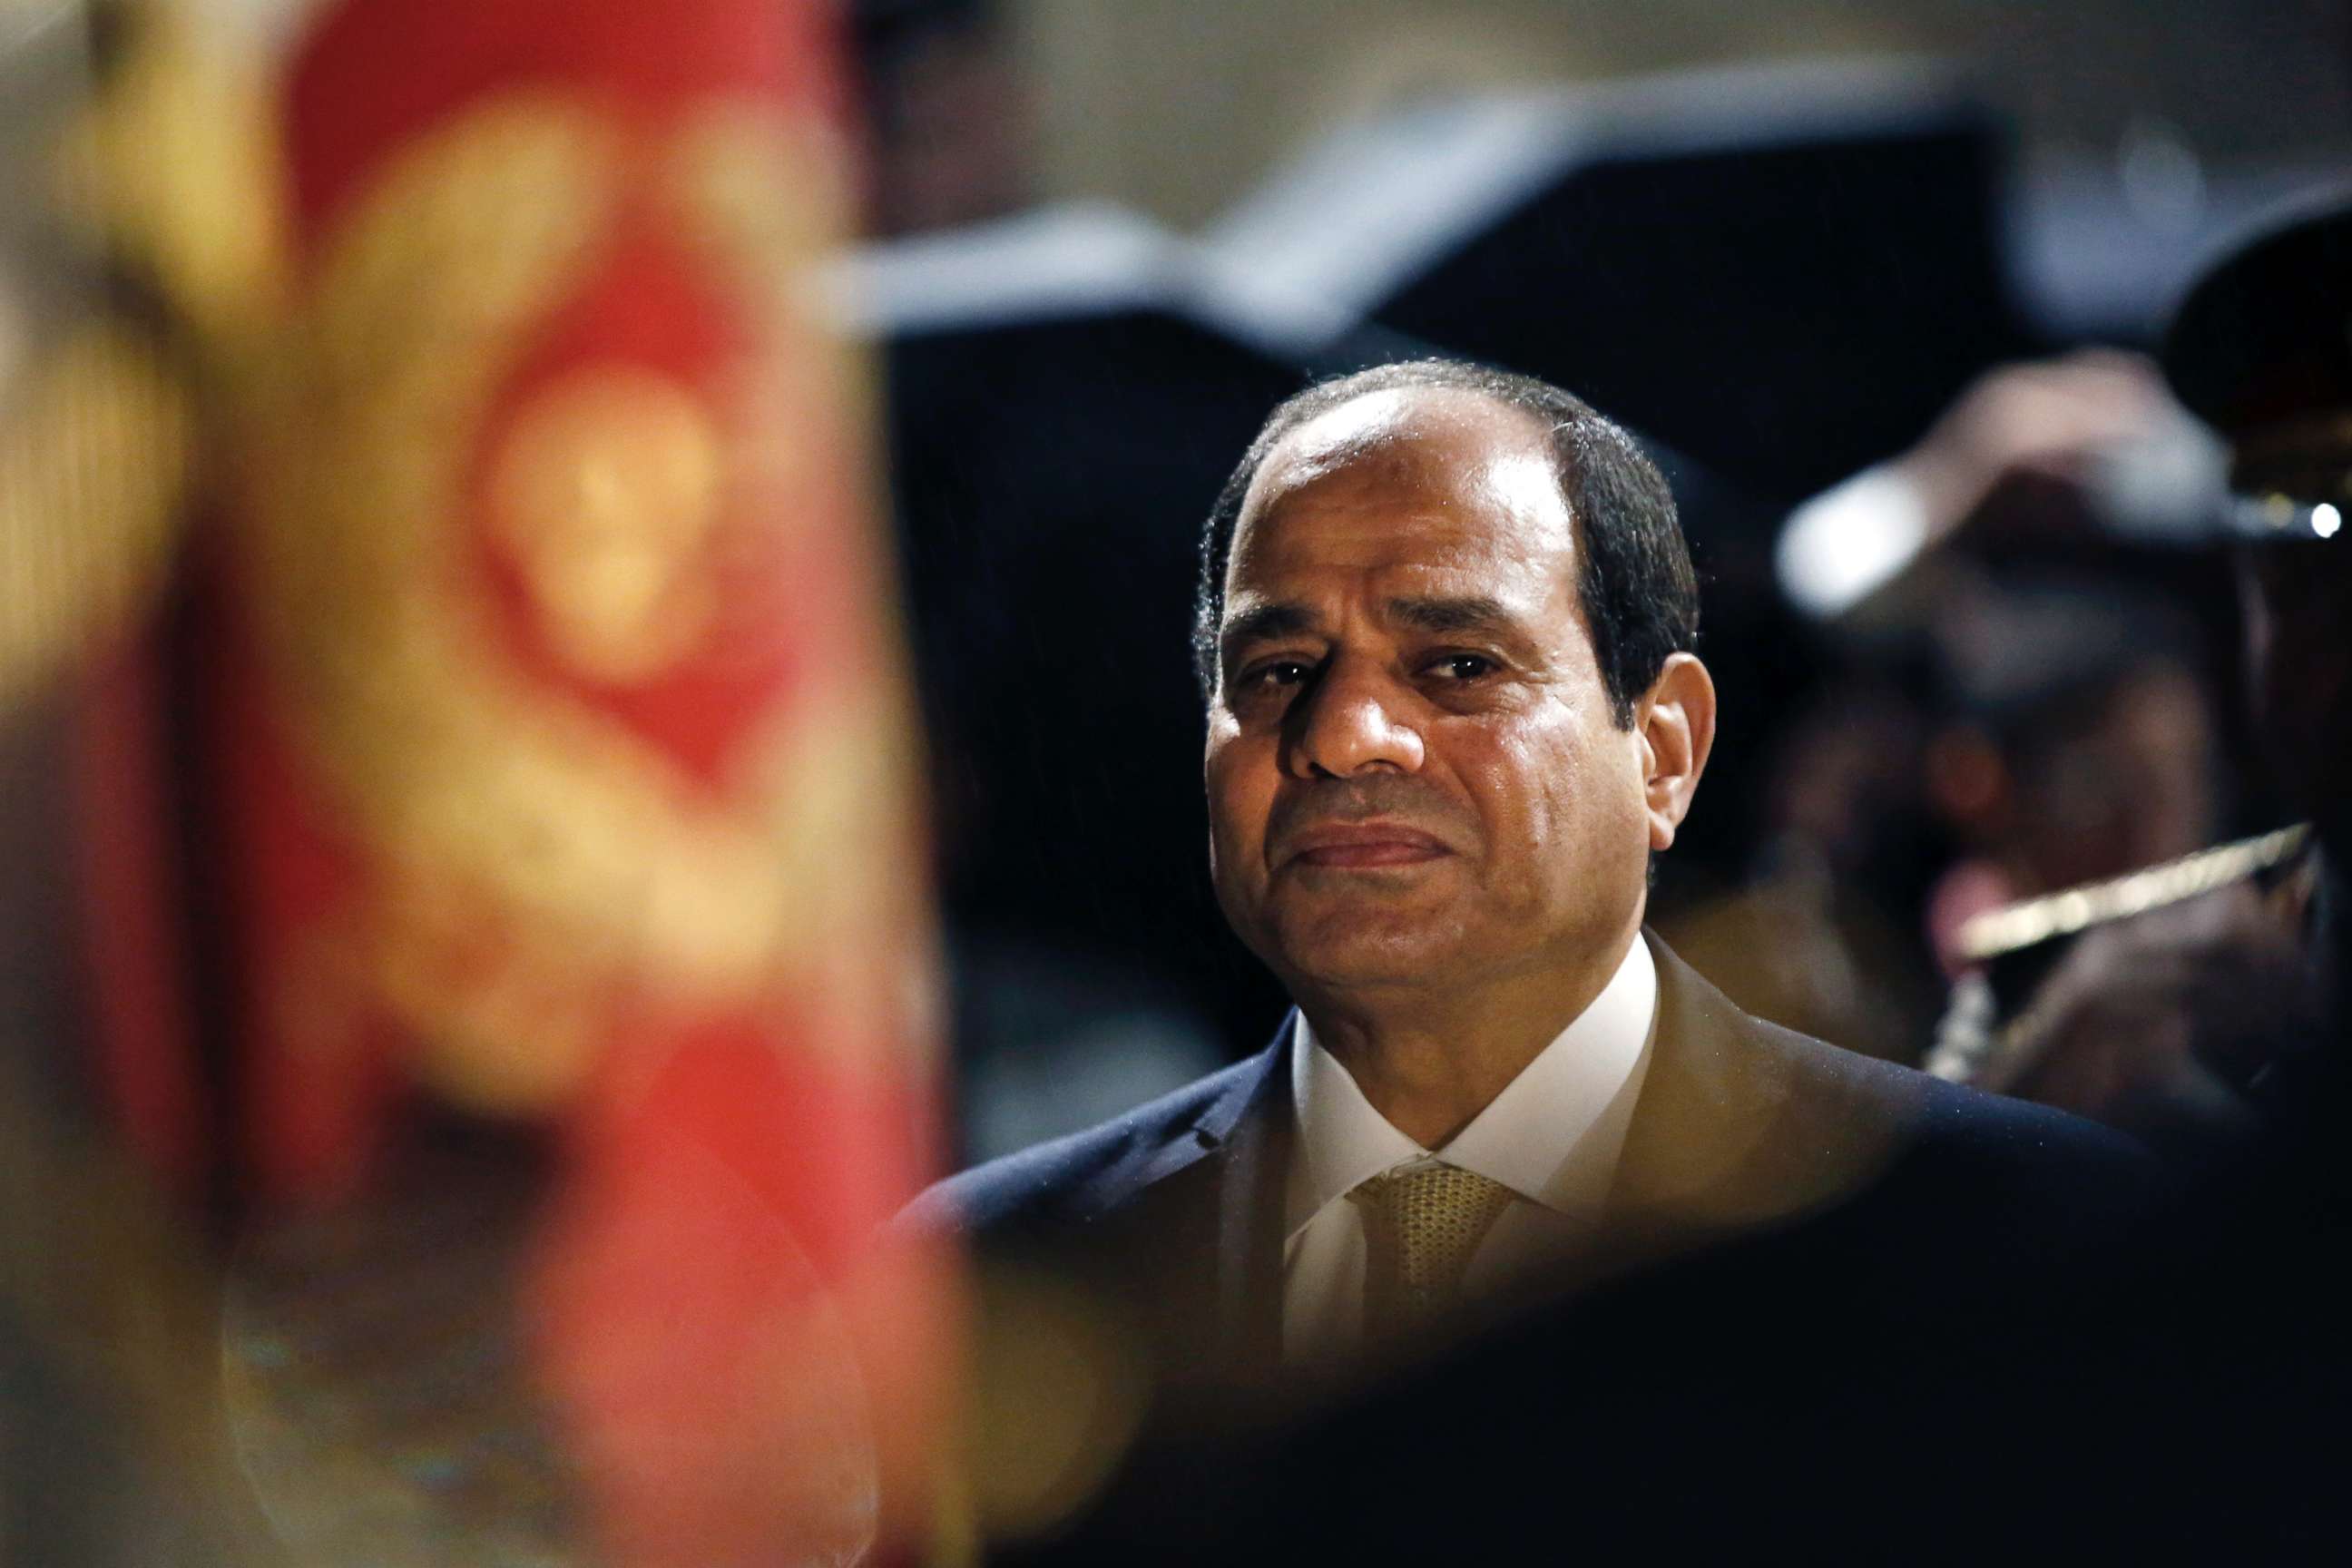 PHOTO: Egyptian President Abdel-Fattah al-Sisi in Paris during a visit to France, Oct. 23, 2017.